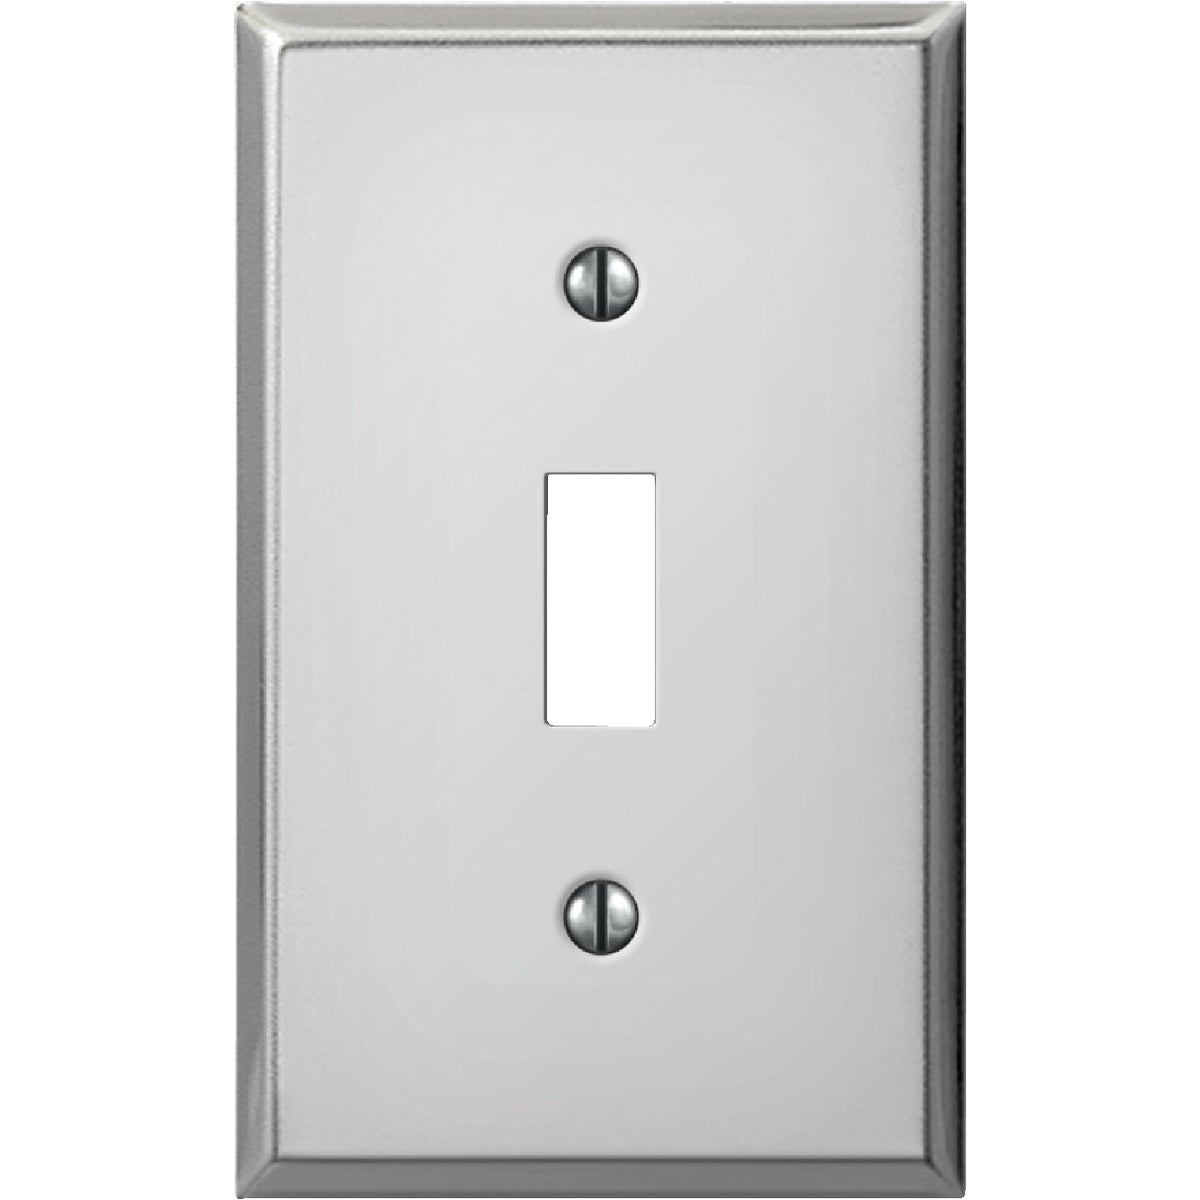 Item 513202, Stamped steel toggle switch wall plate.